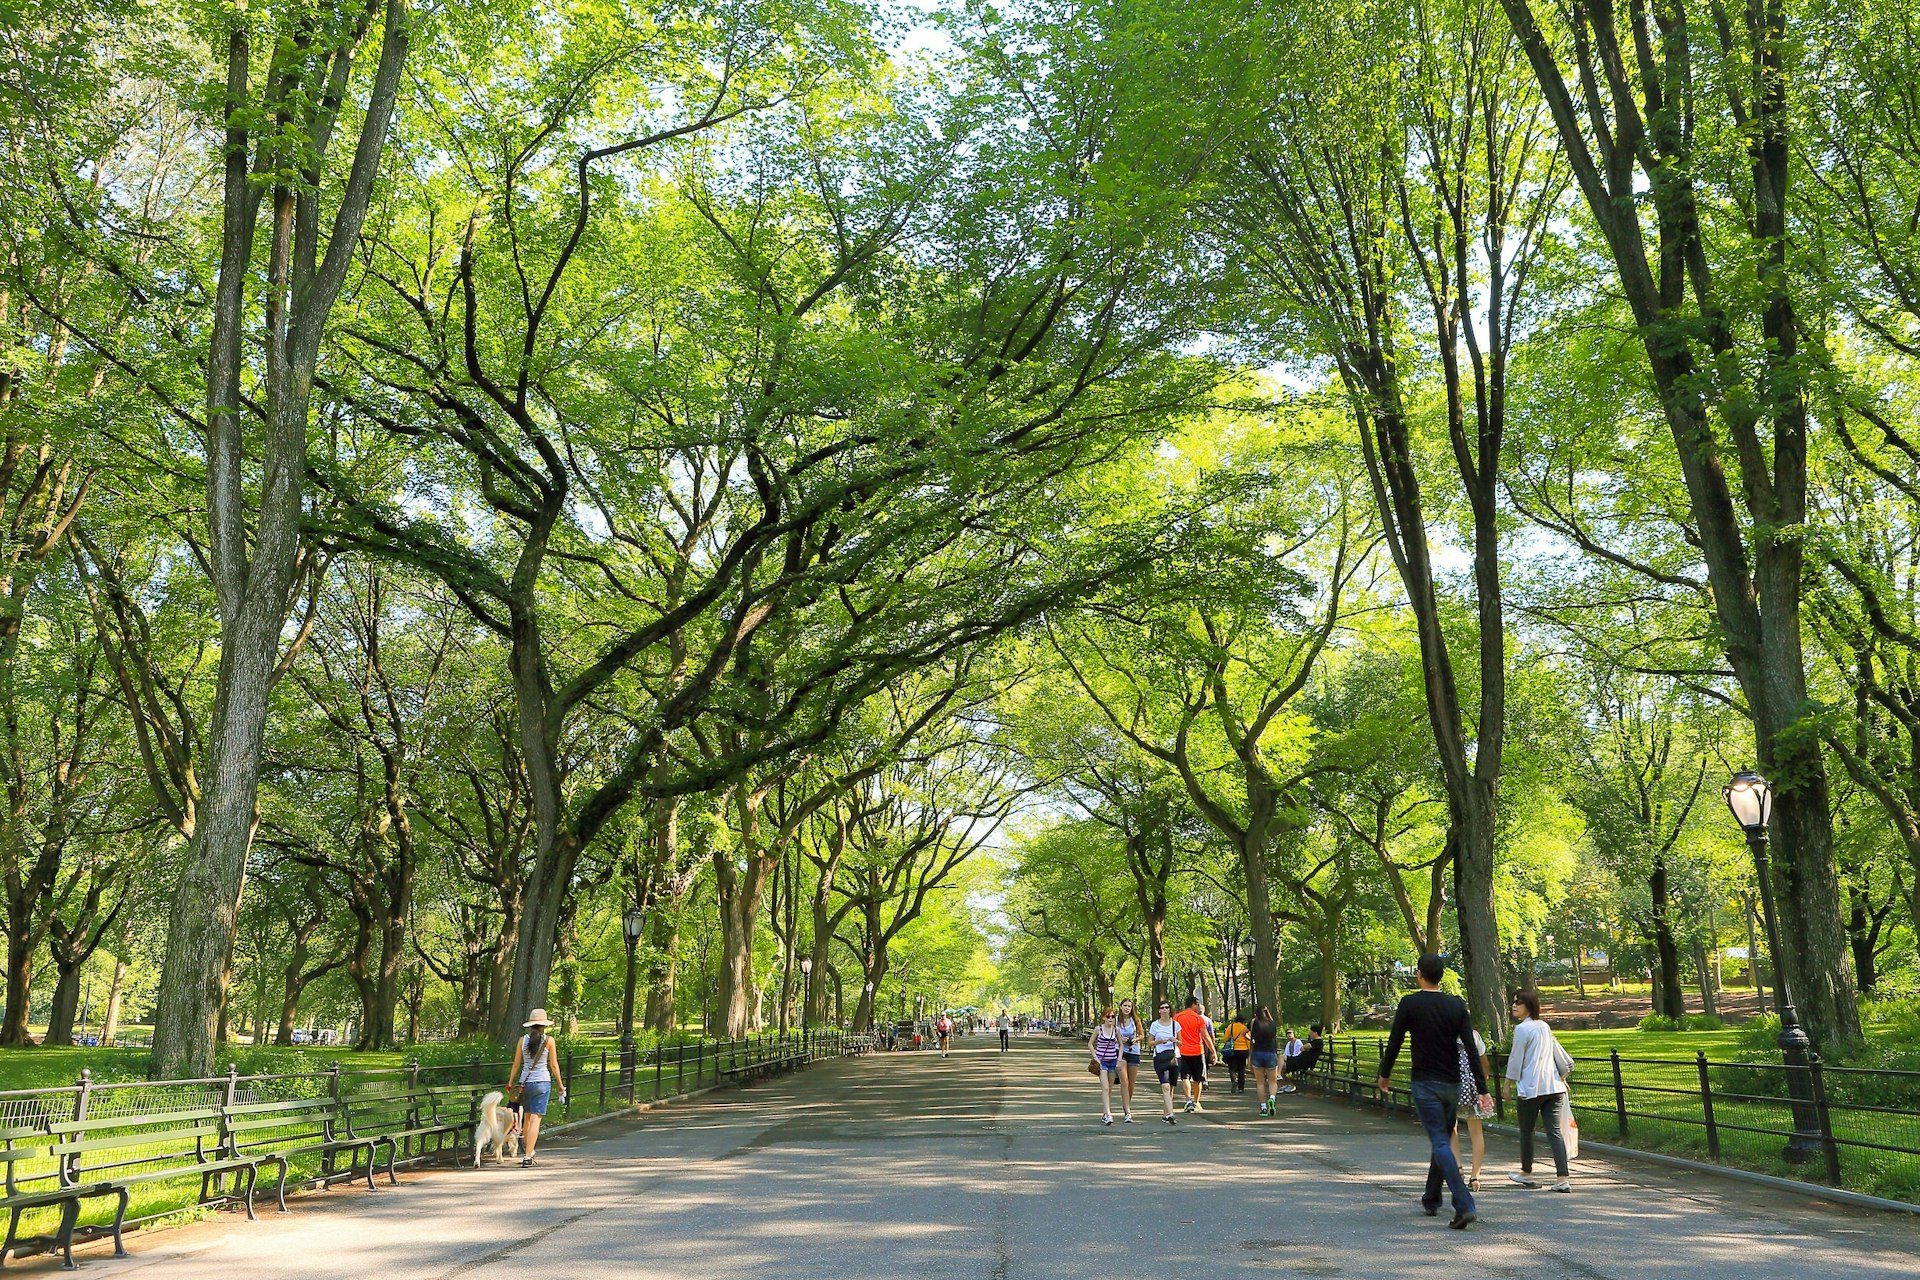  Path at Strawberry Fields in New York City's Central Park